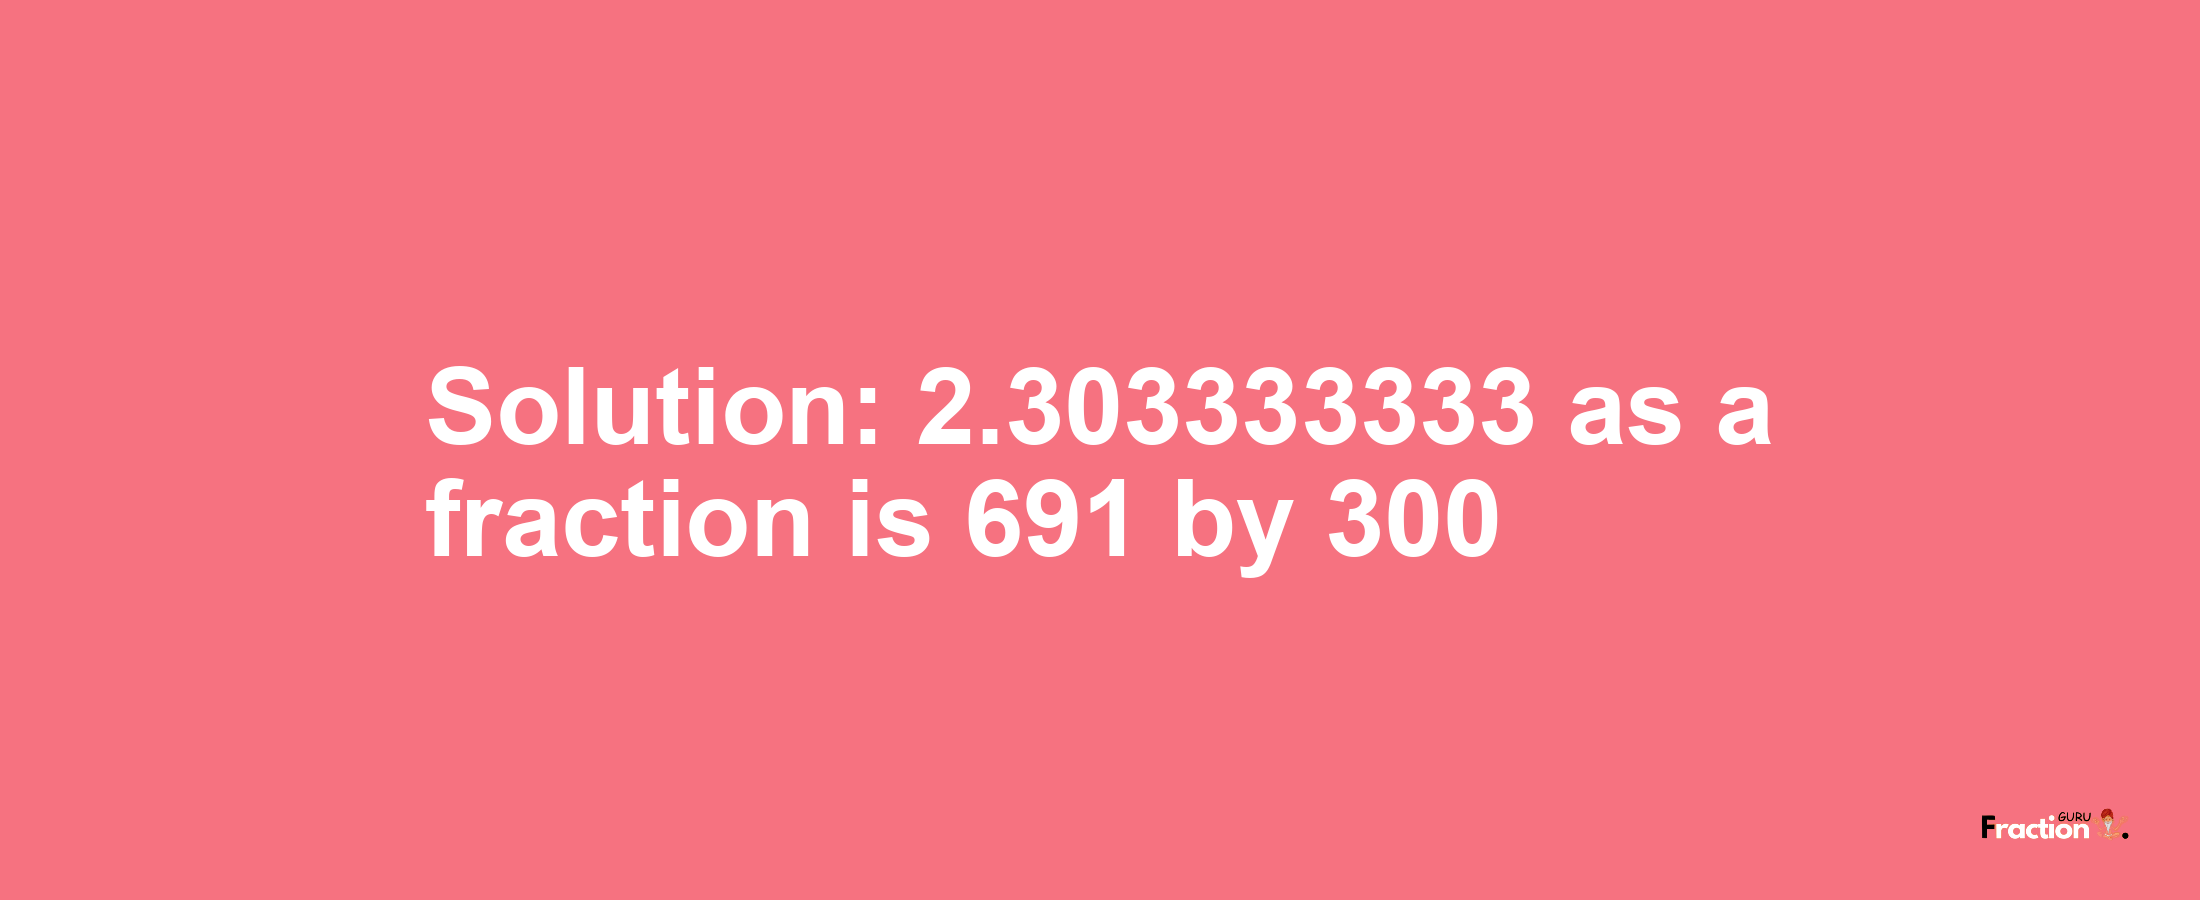 Solution:2.303333333 as a fraction is 691/300